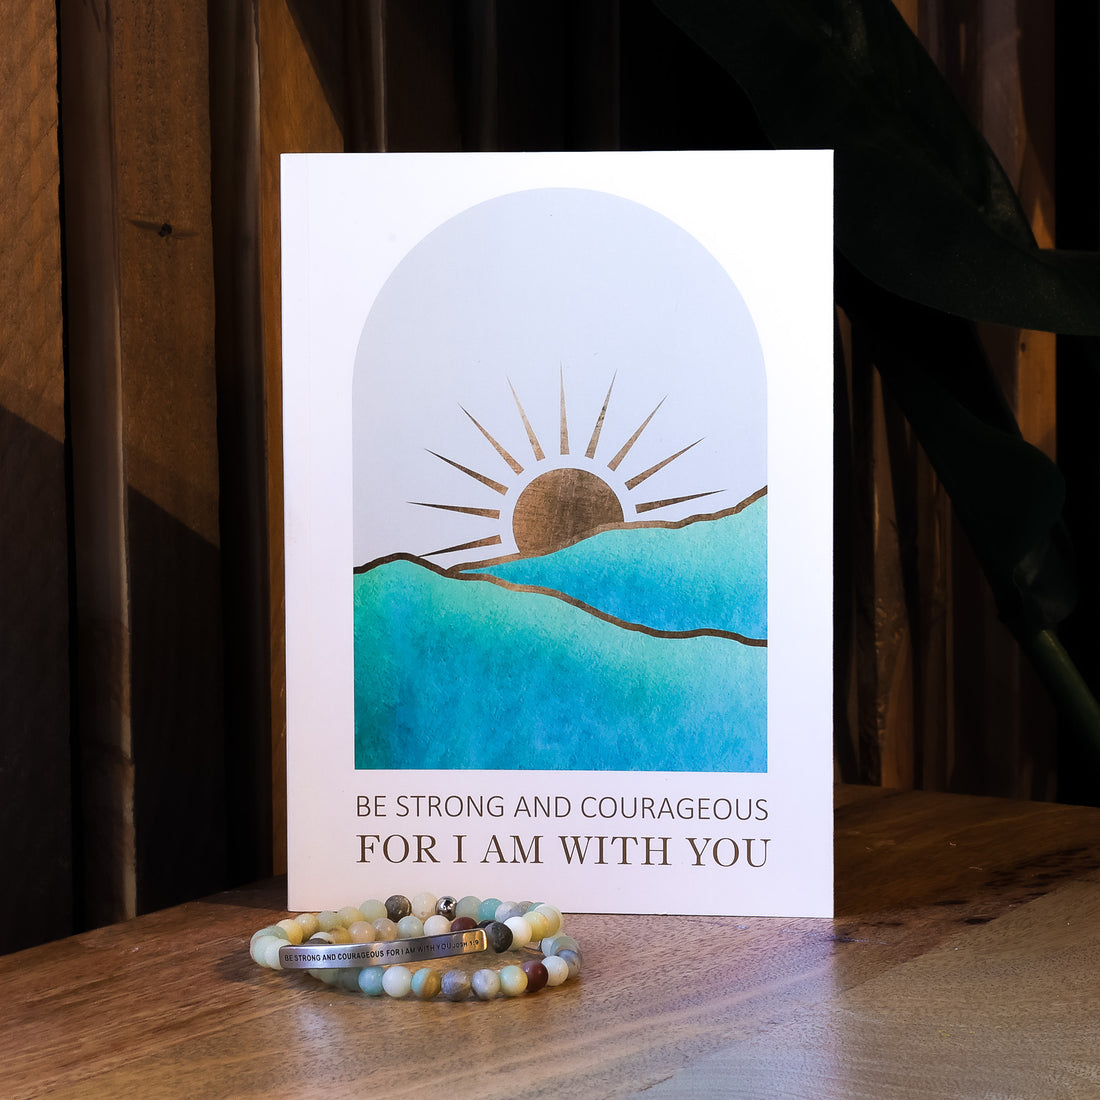 SHINE JOURNAL - BE STRONG AND COURAGEOUS FOR I AM WITH YOU